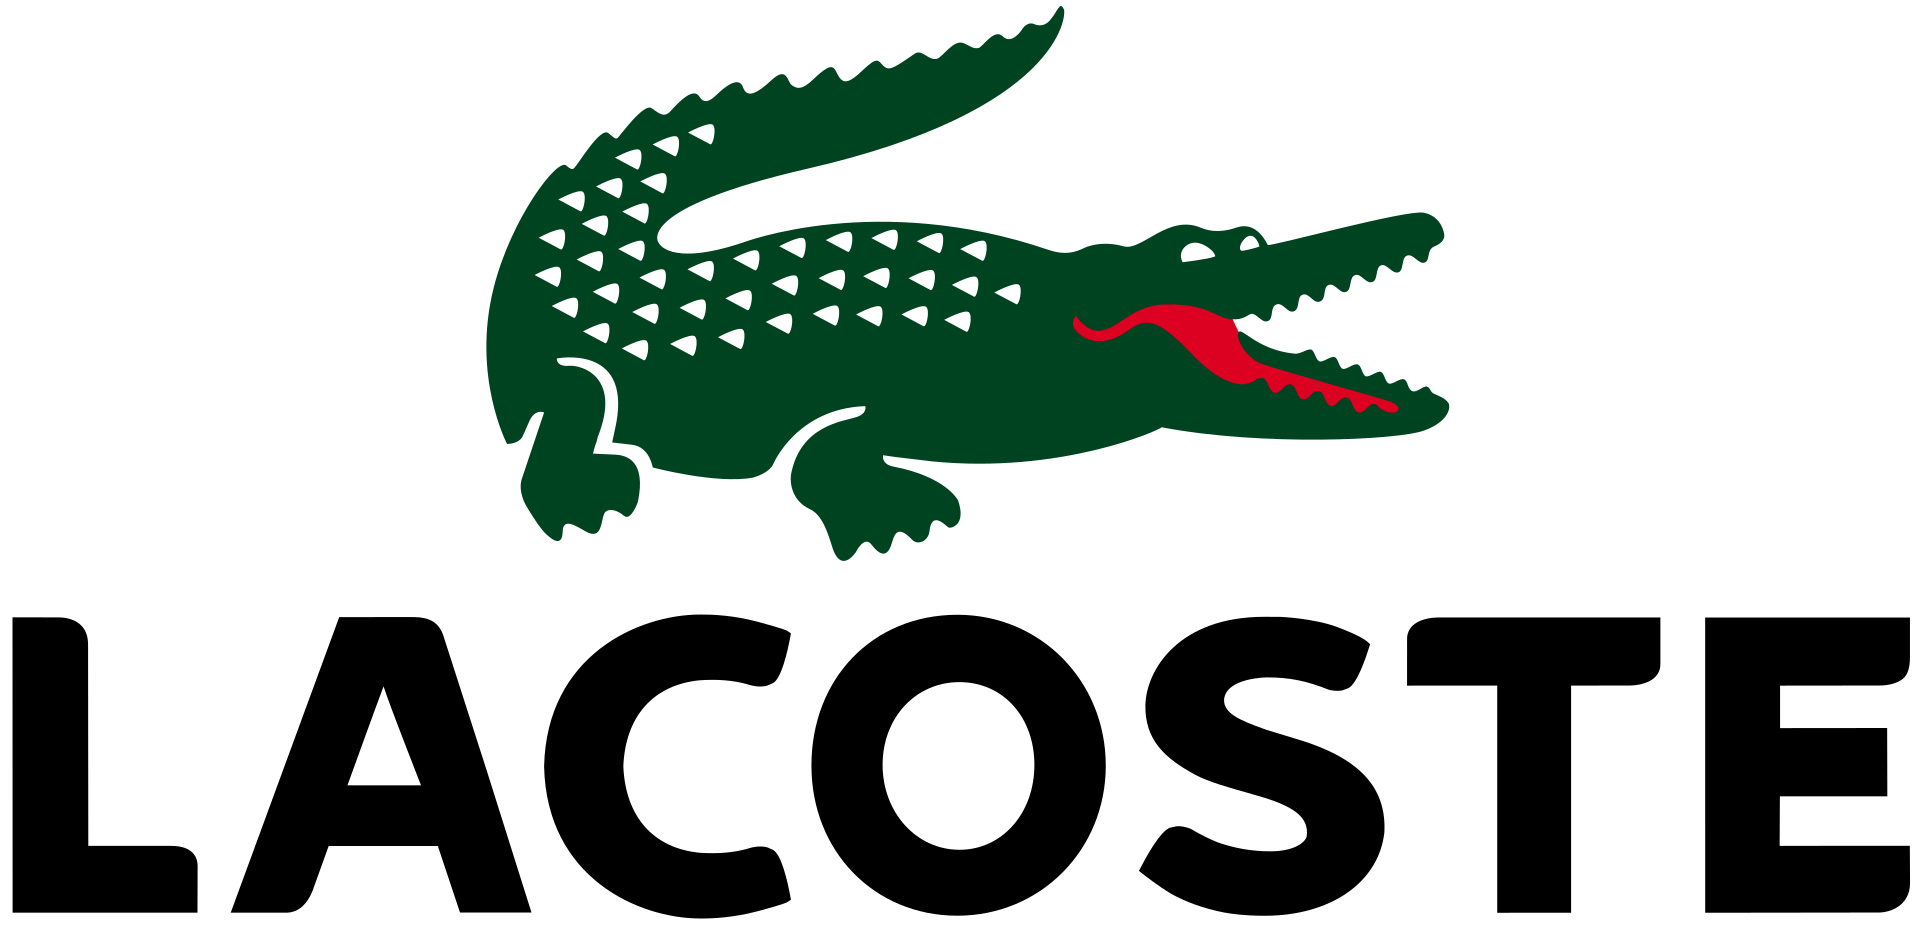 In this example, we extract the green alligator from Lacoste's logo. Once we load the PNG of the logo, we click on the crocodile above the brand's name. The crocodile's color gets substituted in the color match option and in the output, we get the image of this reptile. (Source: Wikipedia.)